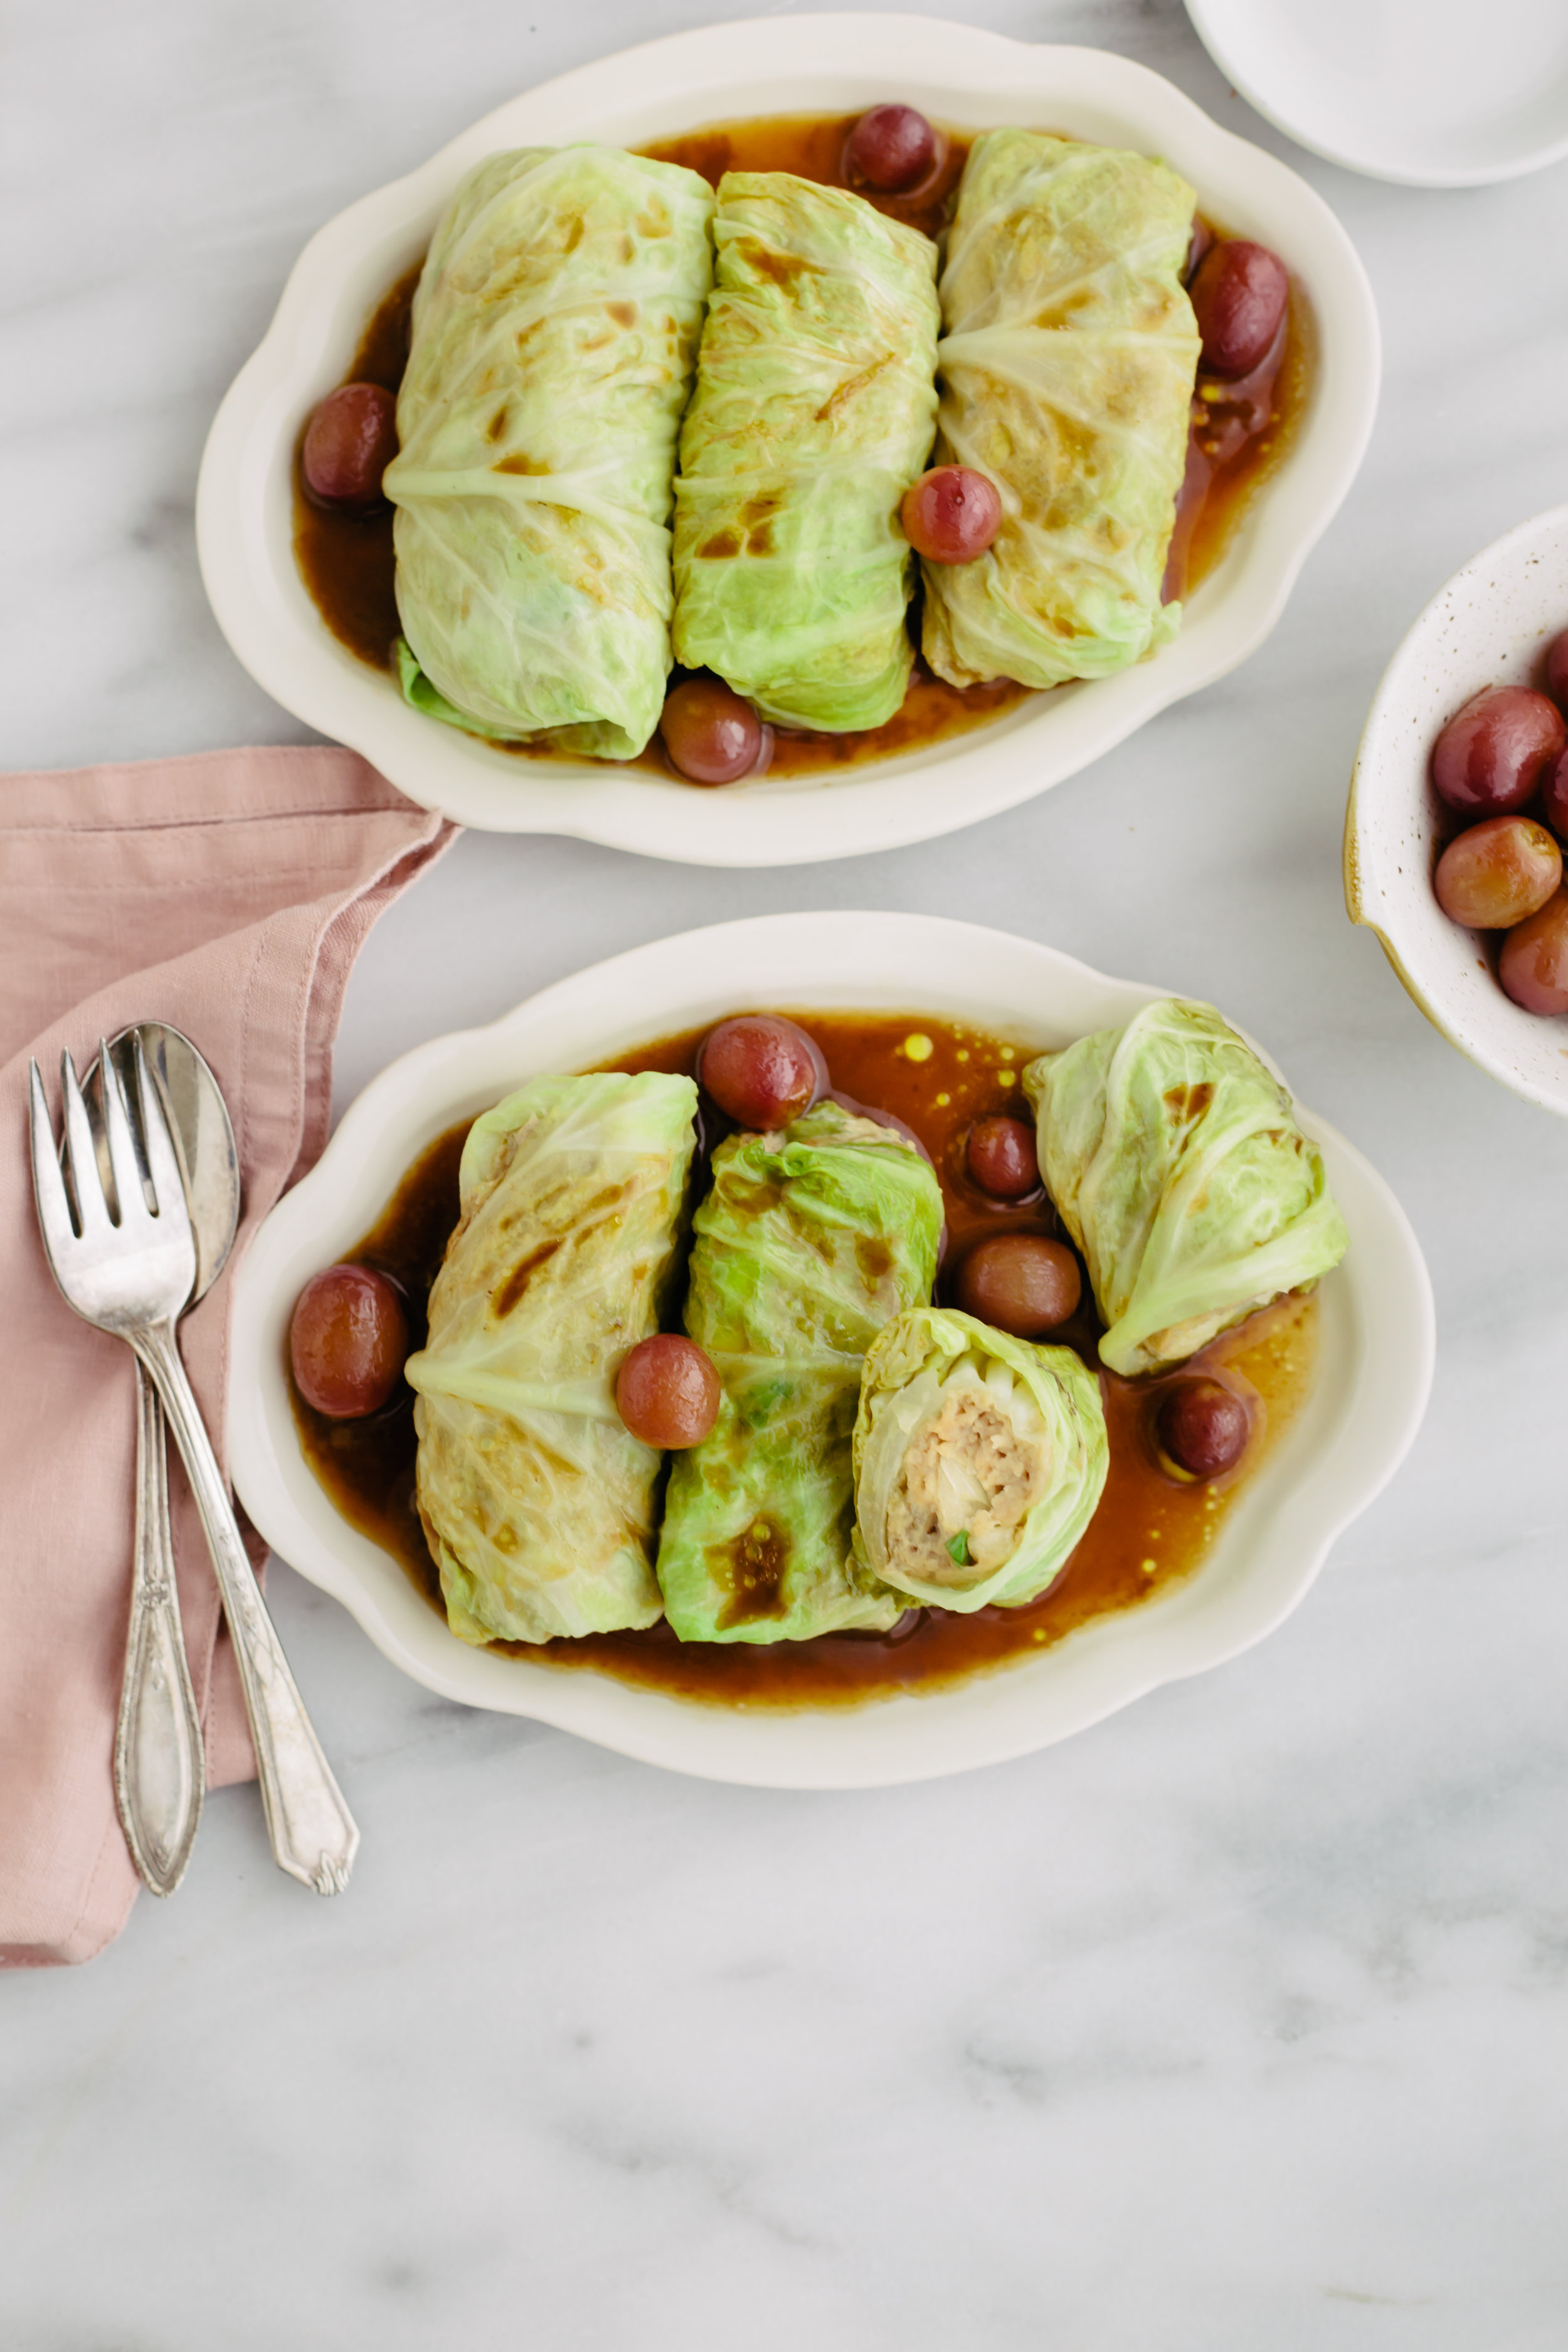 cabbage rolls with grapes1.jpg